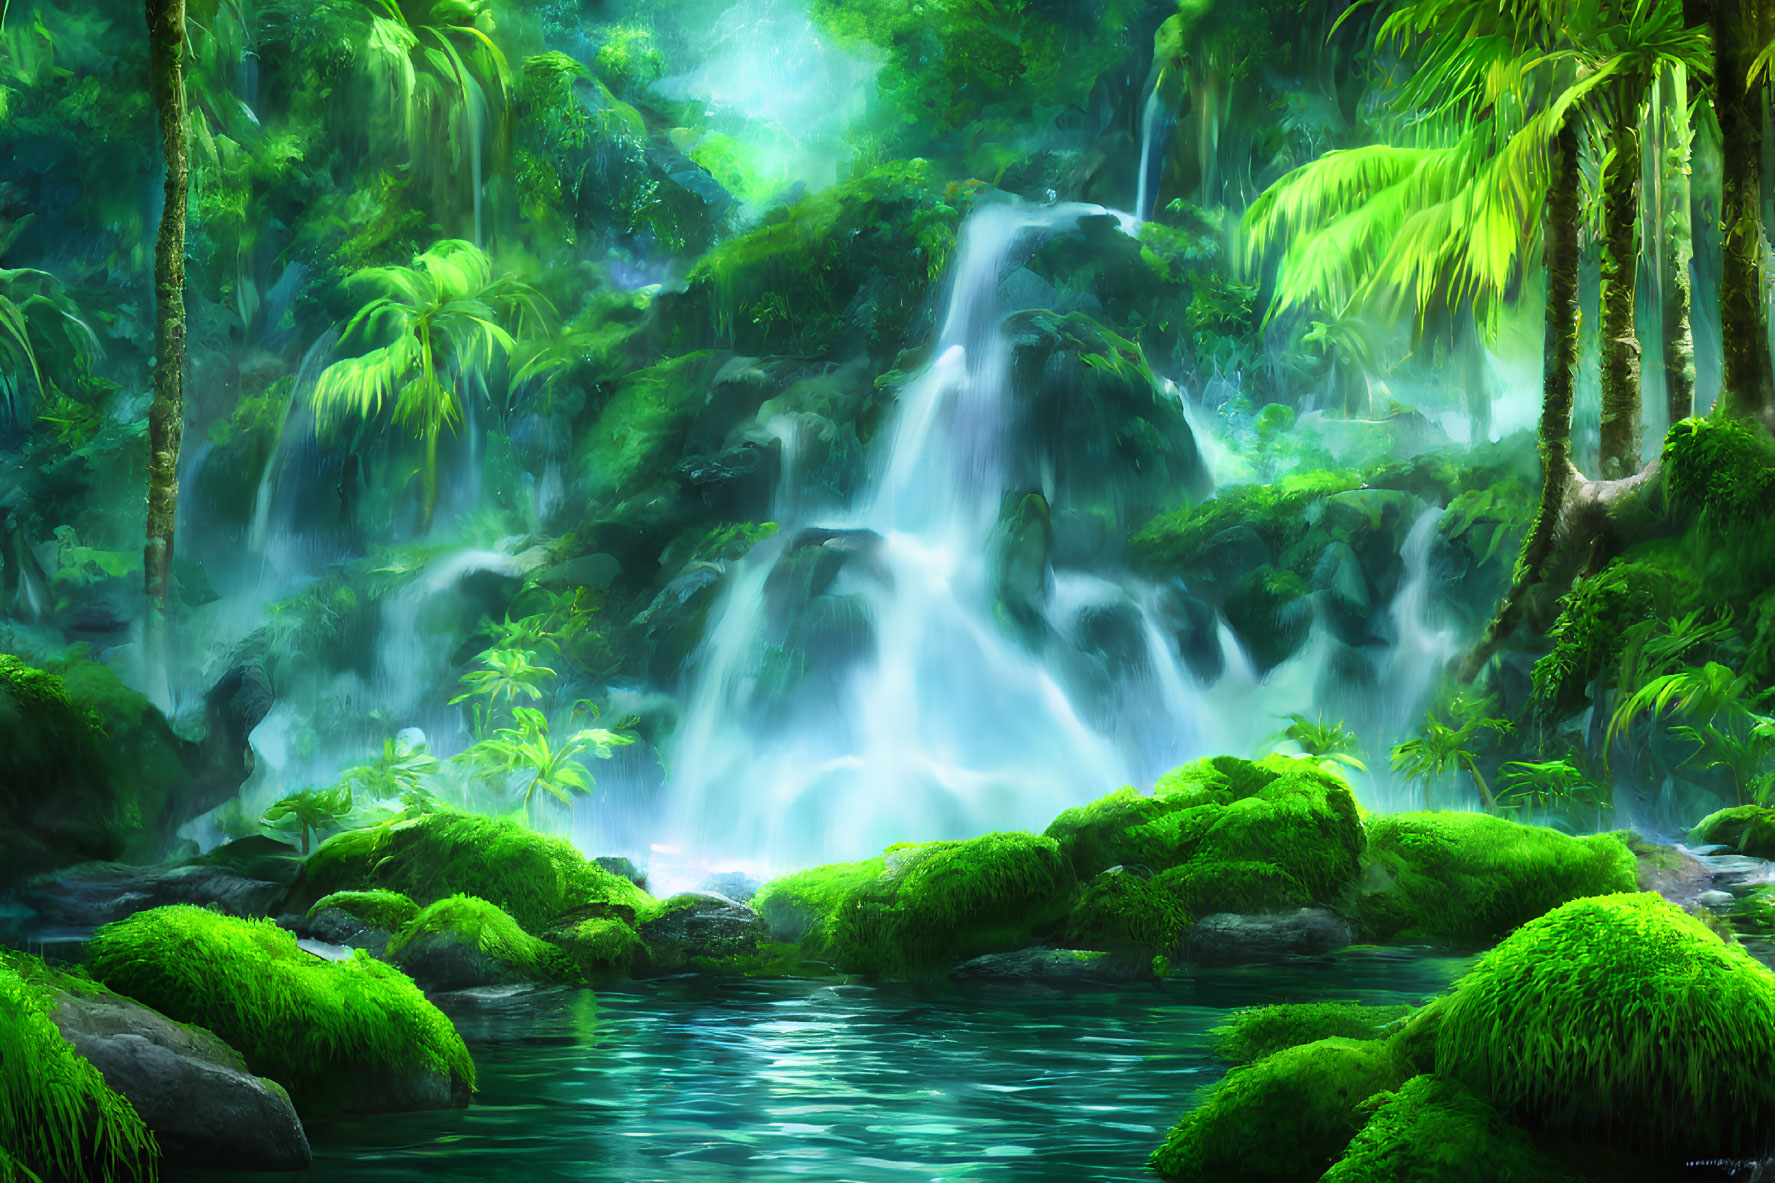 Verdant jungle scene with cascading waterfall and mossy rocks